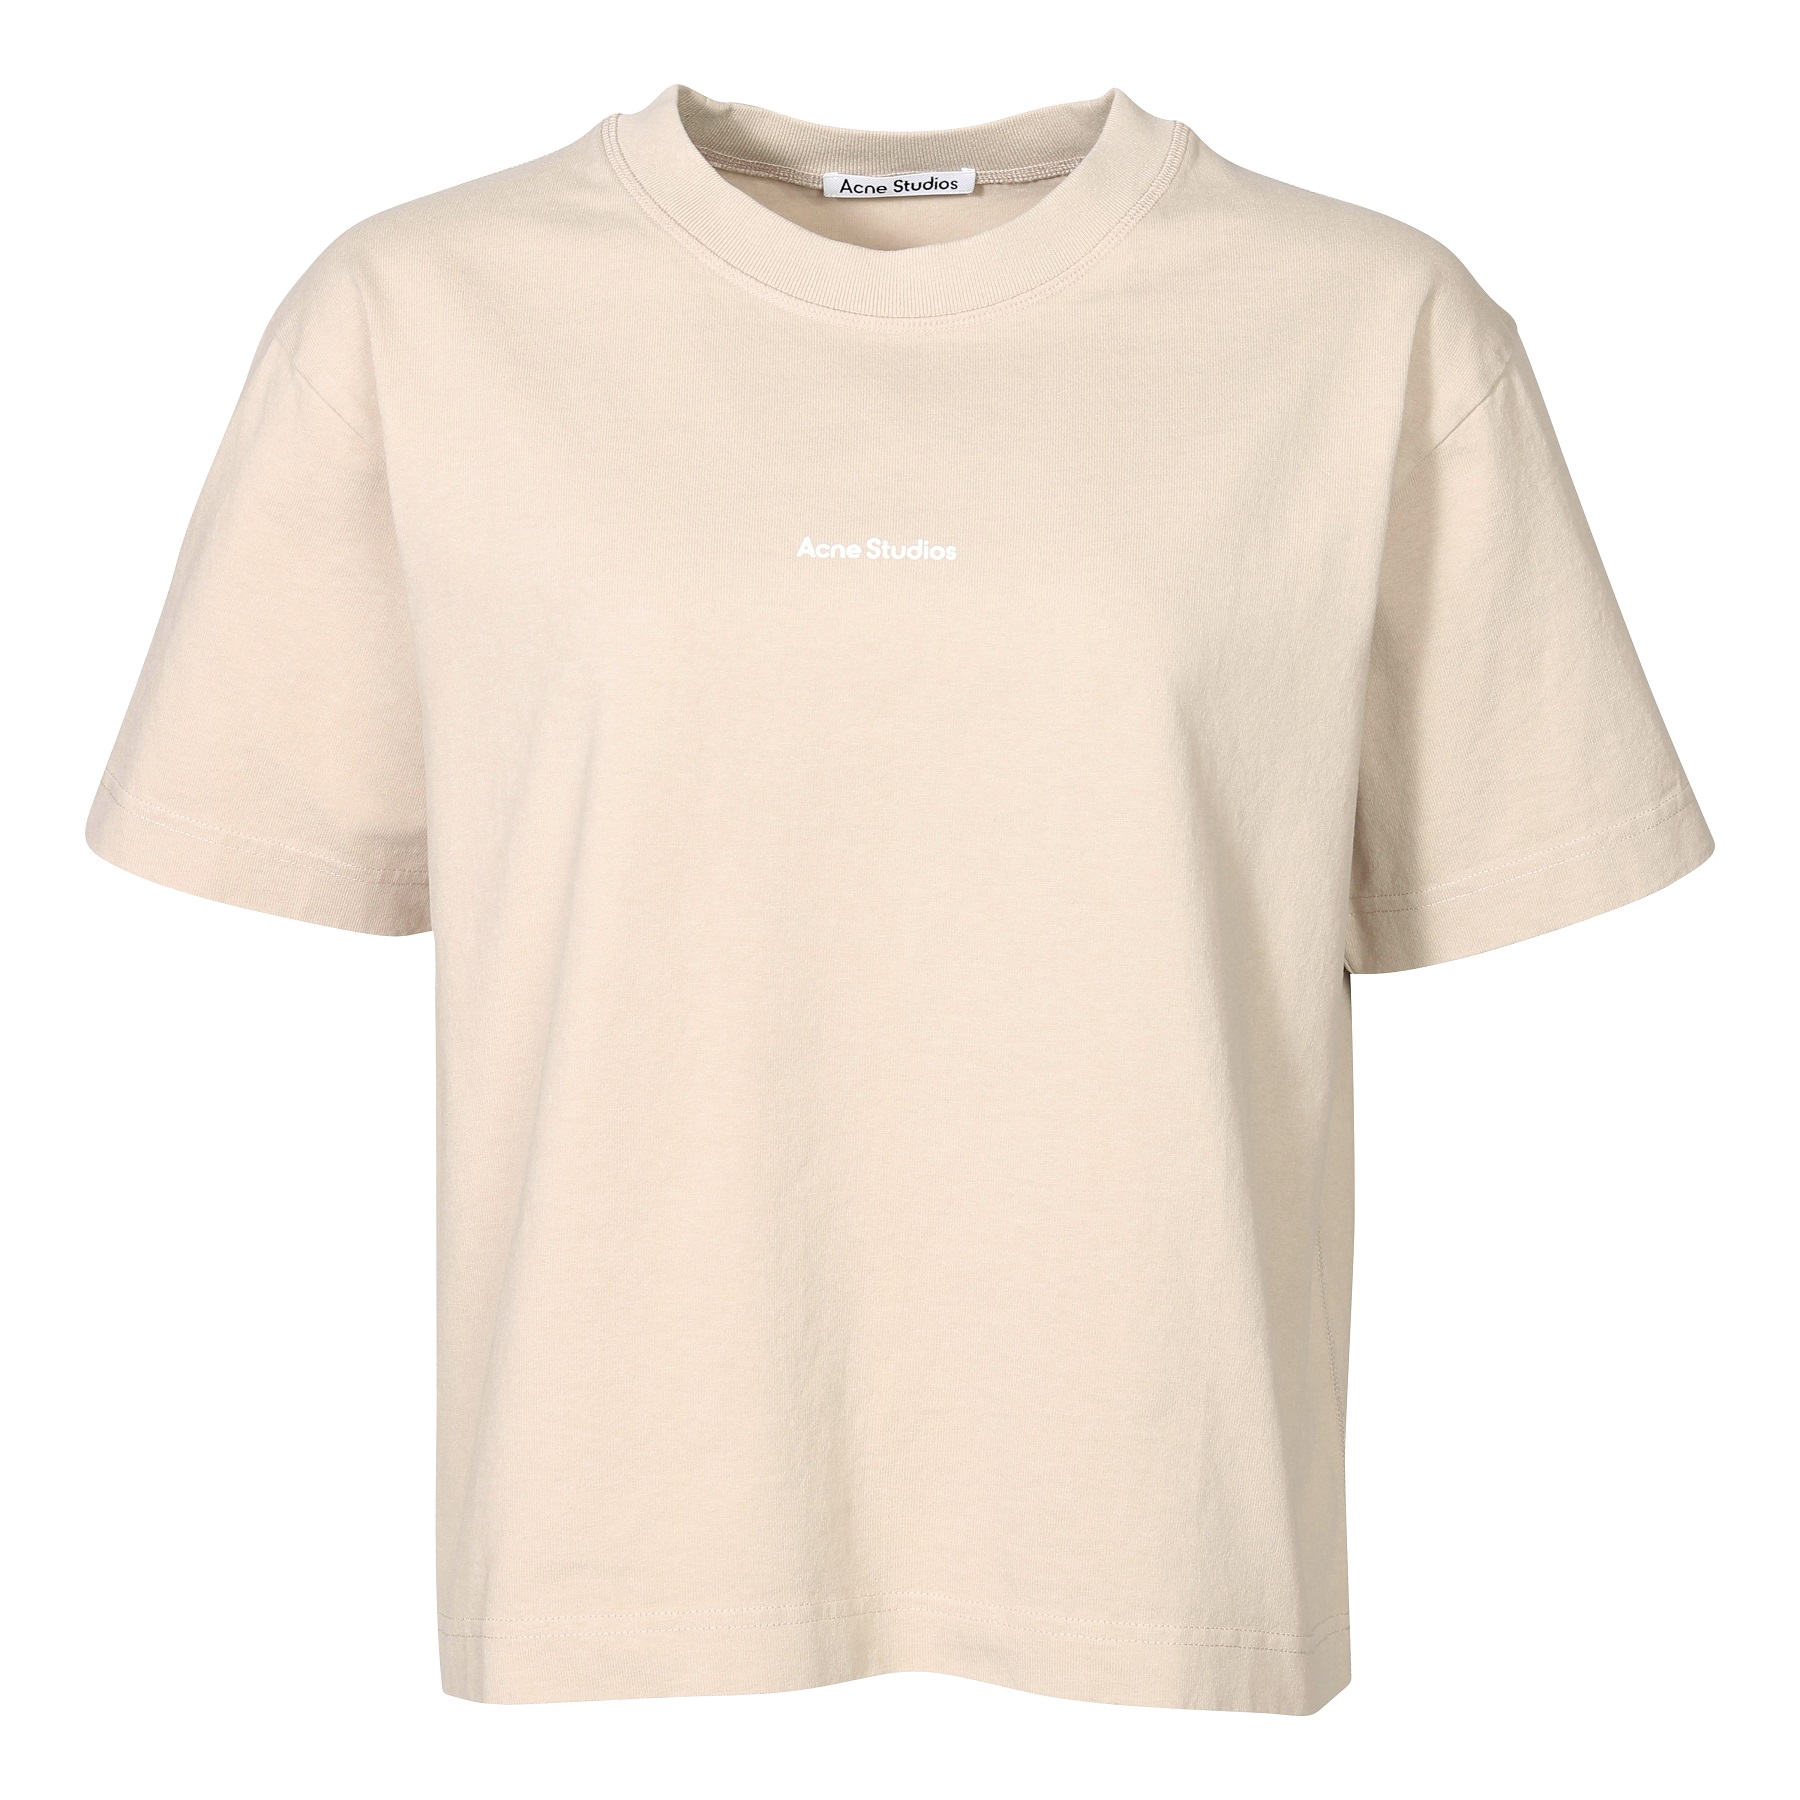 ACNE STUDIOS Stamp T-Shirt in Champagne Beige M